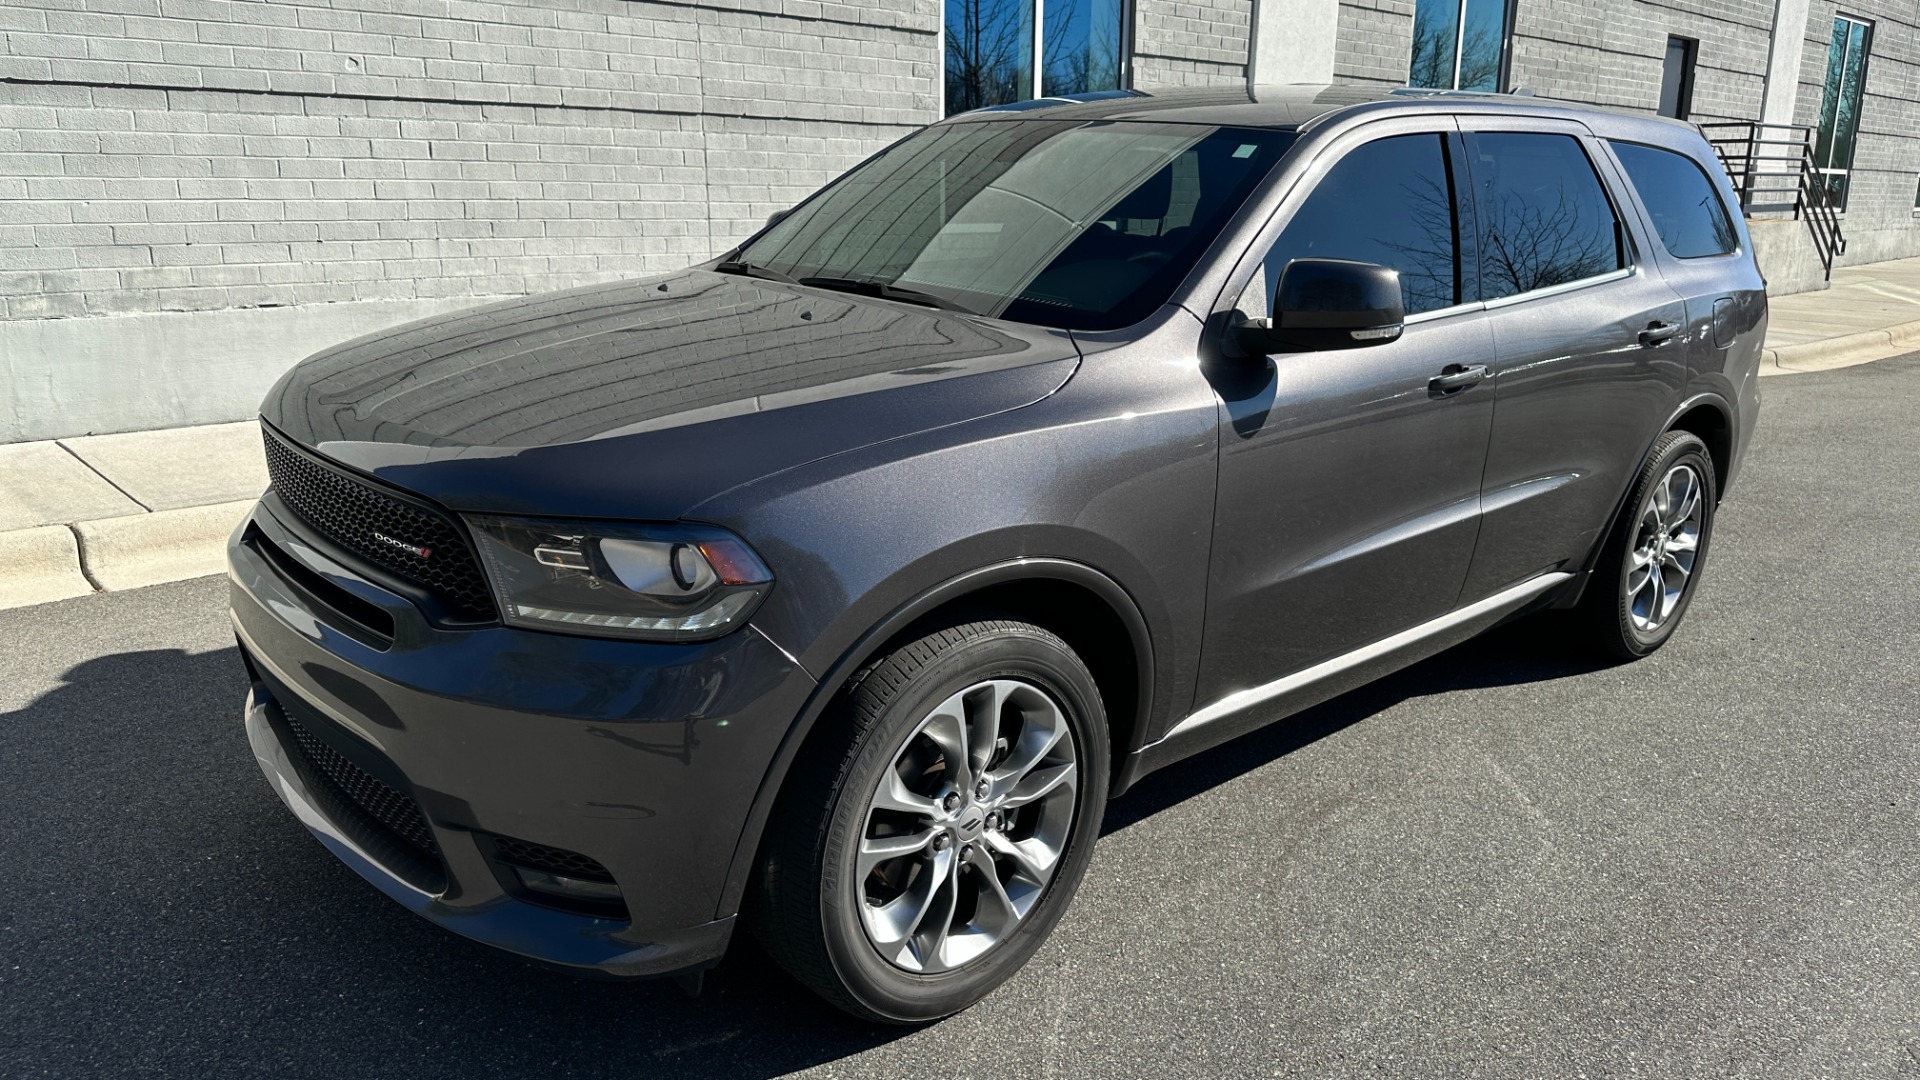 Used 2020 Dodge Durango GT PLUS / HEATED SEATS / SUEDE LEATHER / 3 ROW SEATING / REMOTE START for sale $27,995 at Formula Imports in Charlotte NC 28227 5